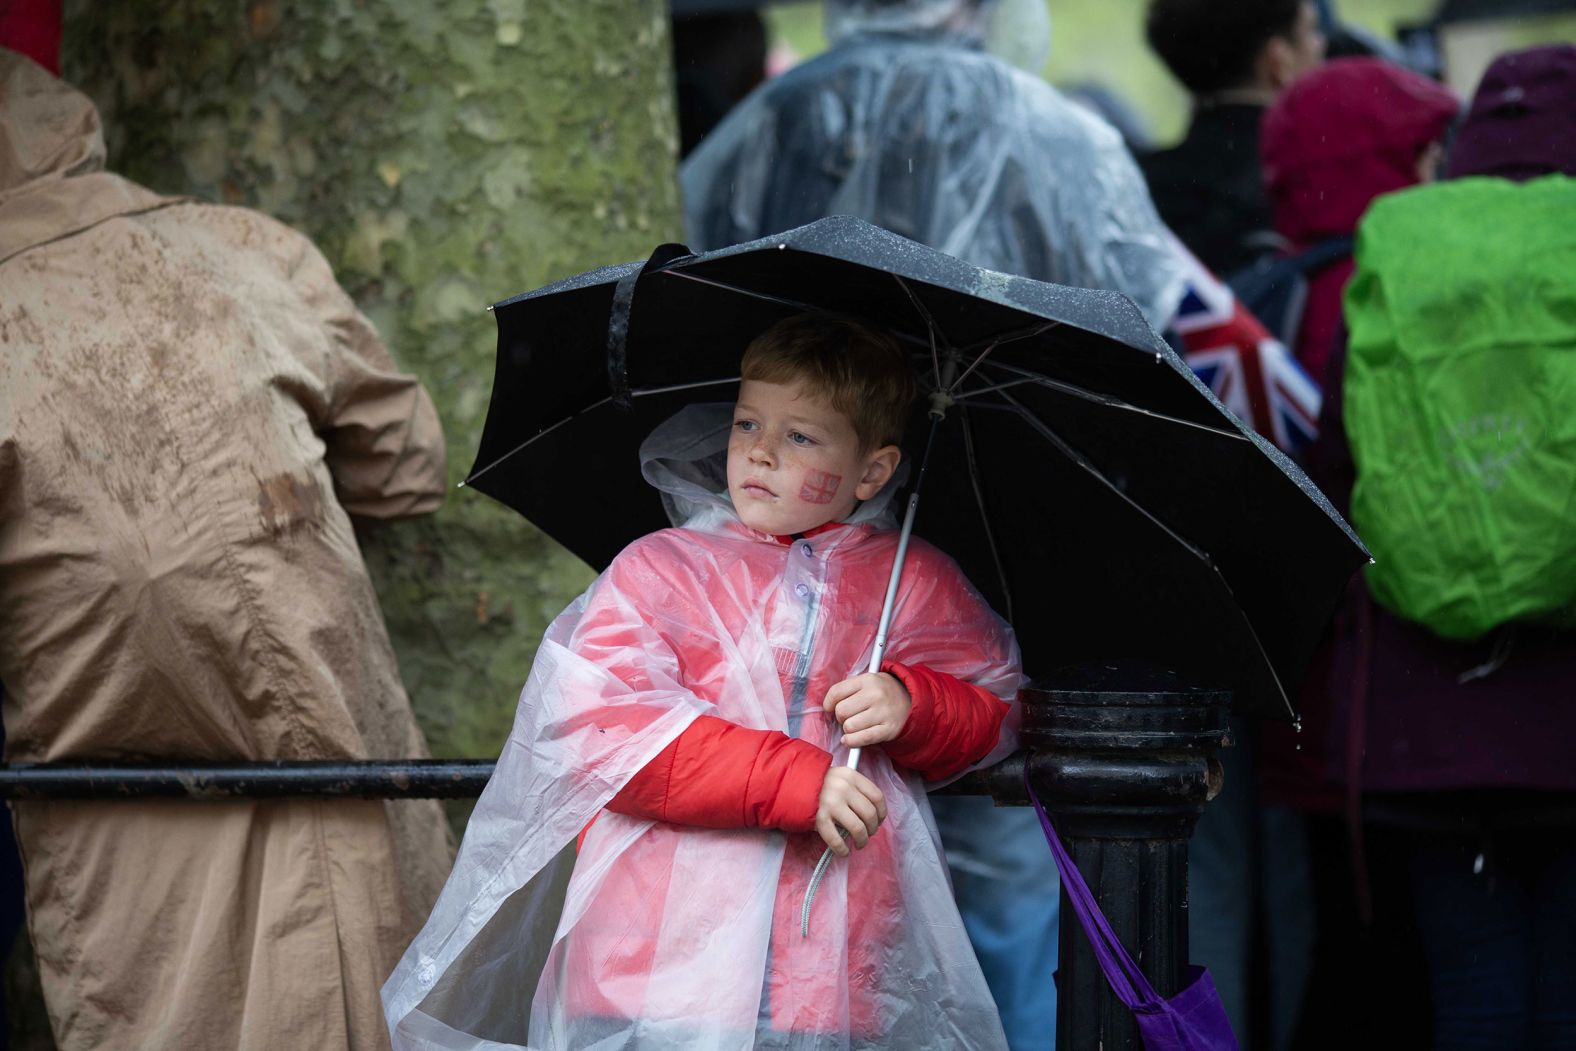 A boy holds an umbrella as he watches history unfold.